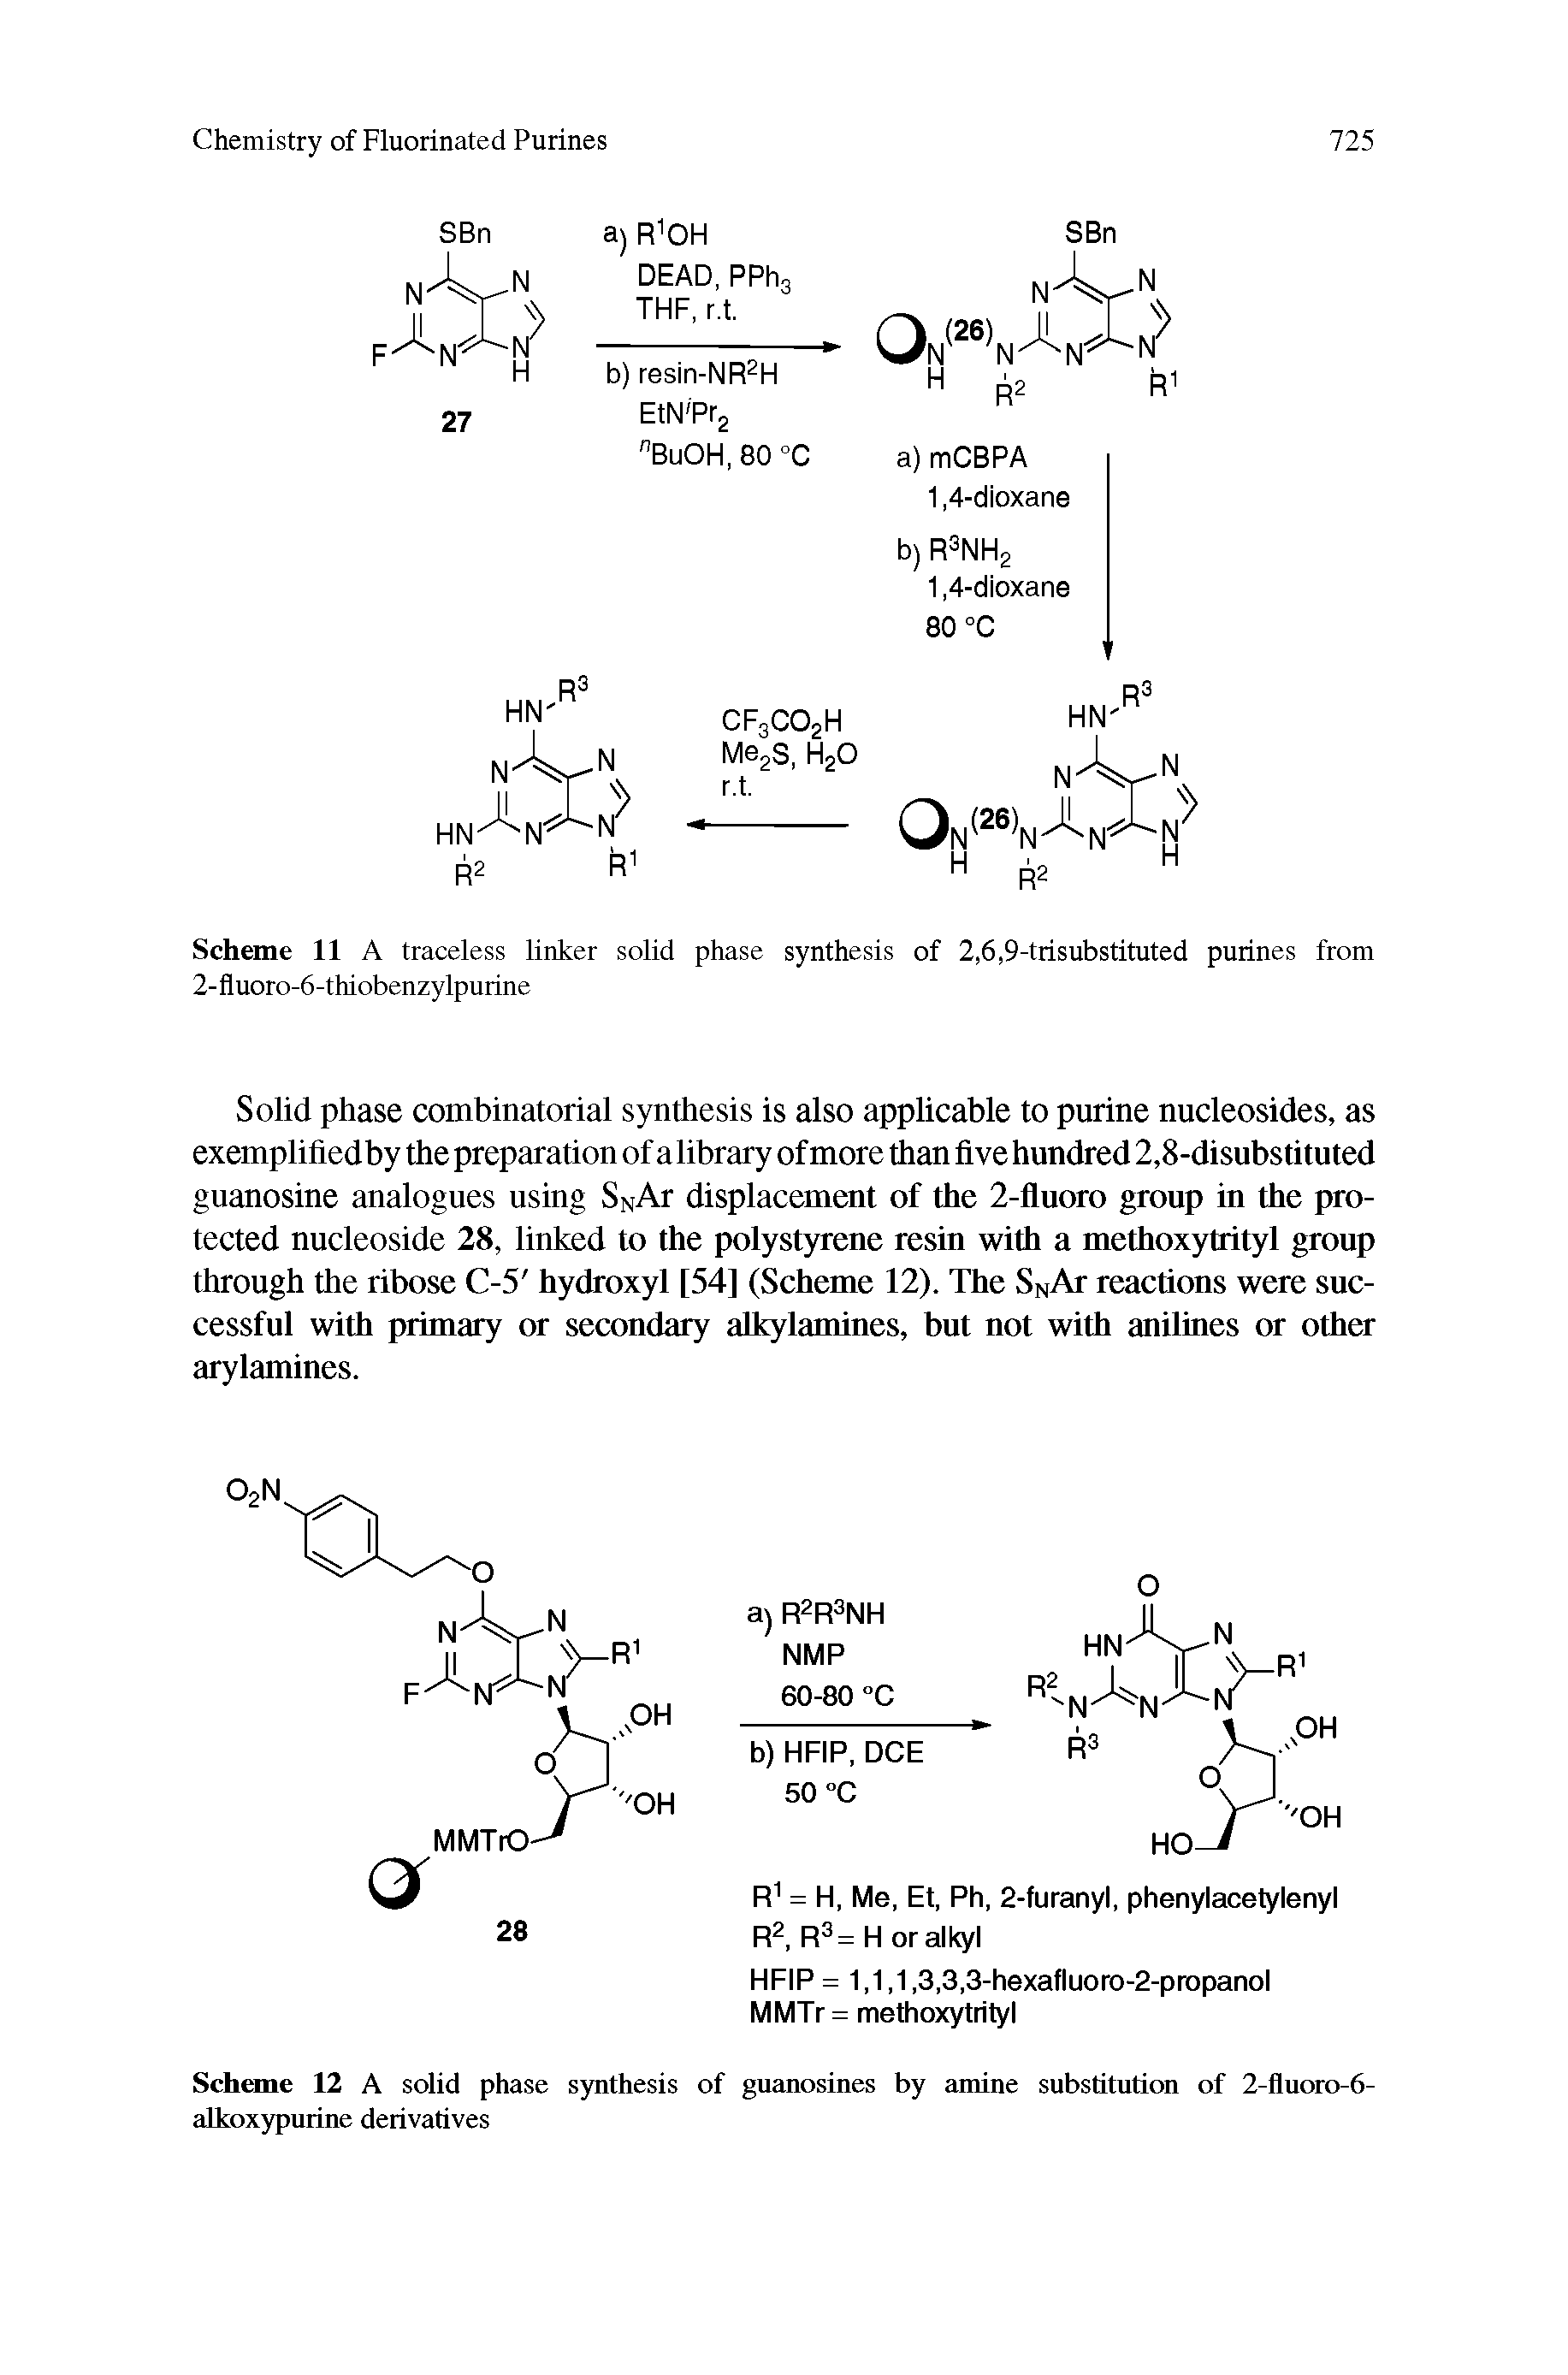 Scheme 11 A traceless linker solid phase synthesis of 2,6,9-trisubstituted purines from 2-fluoro-6-thiobenzylpurine...